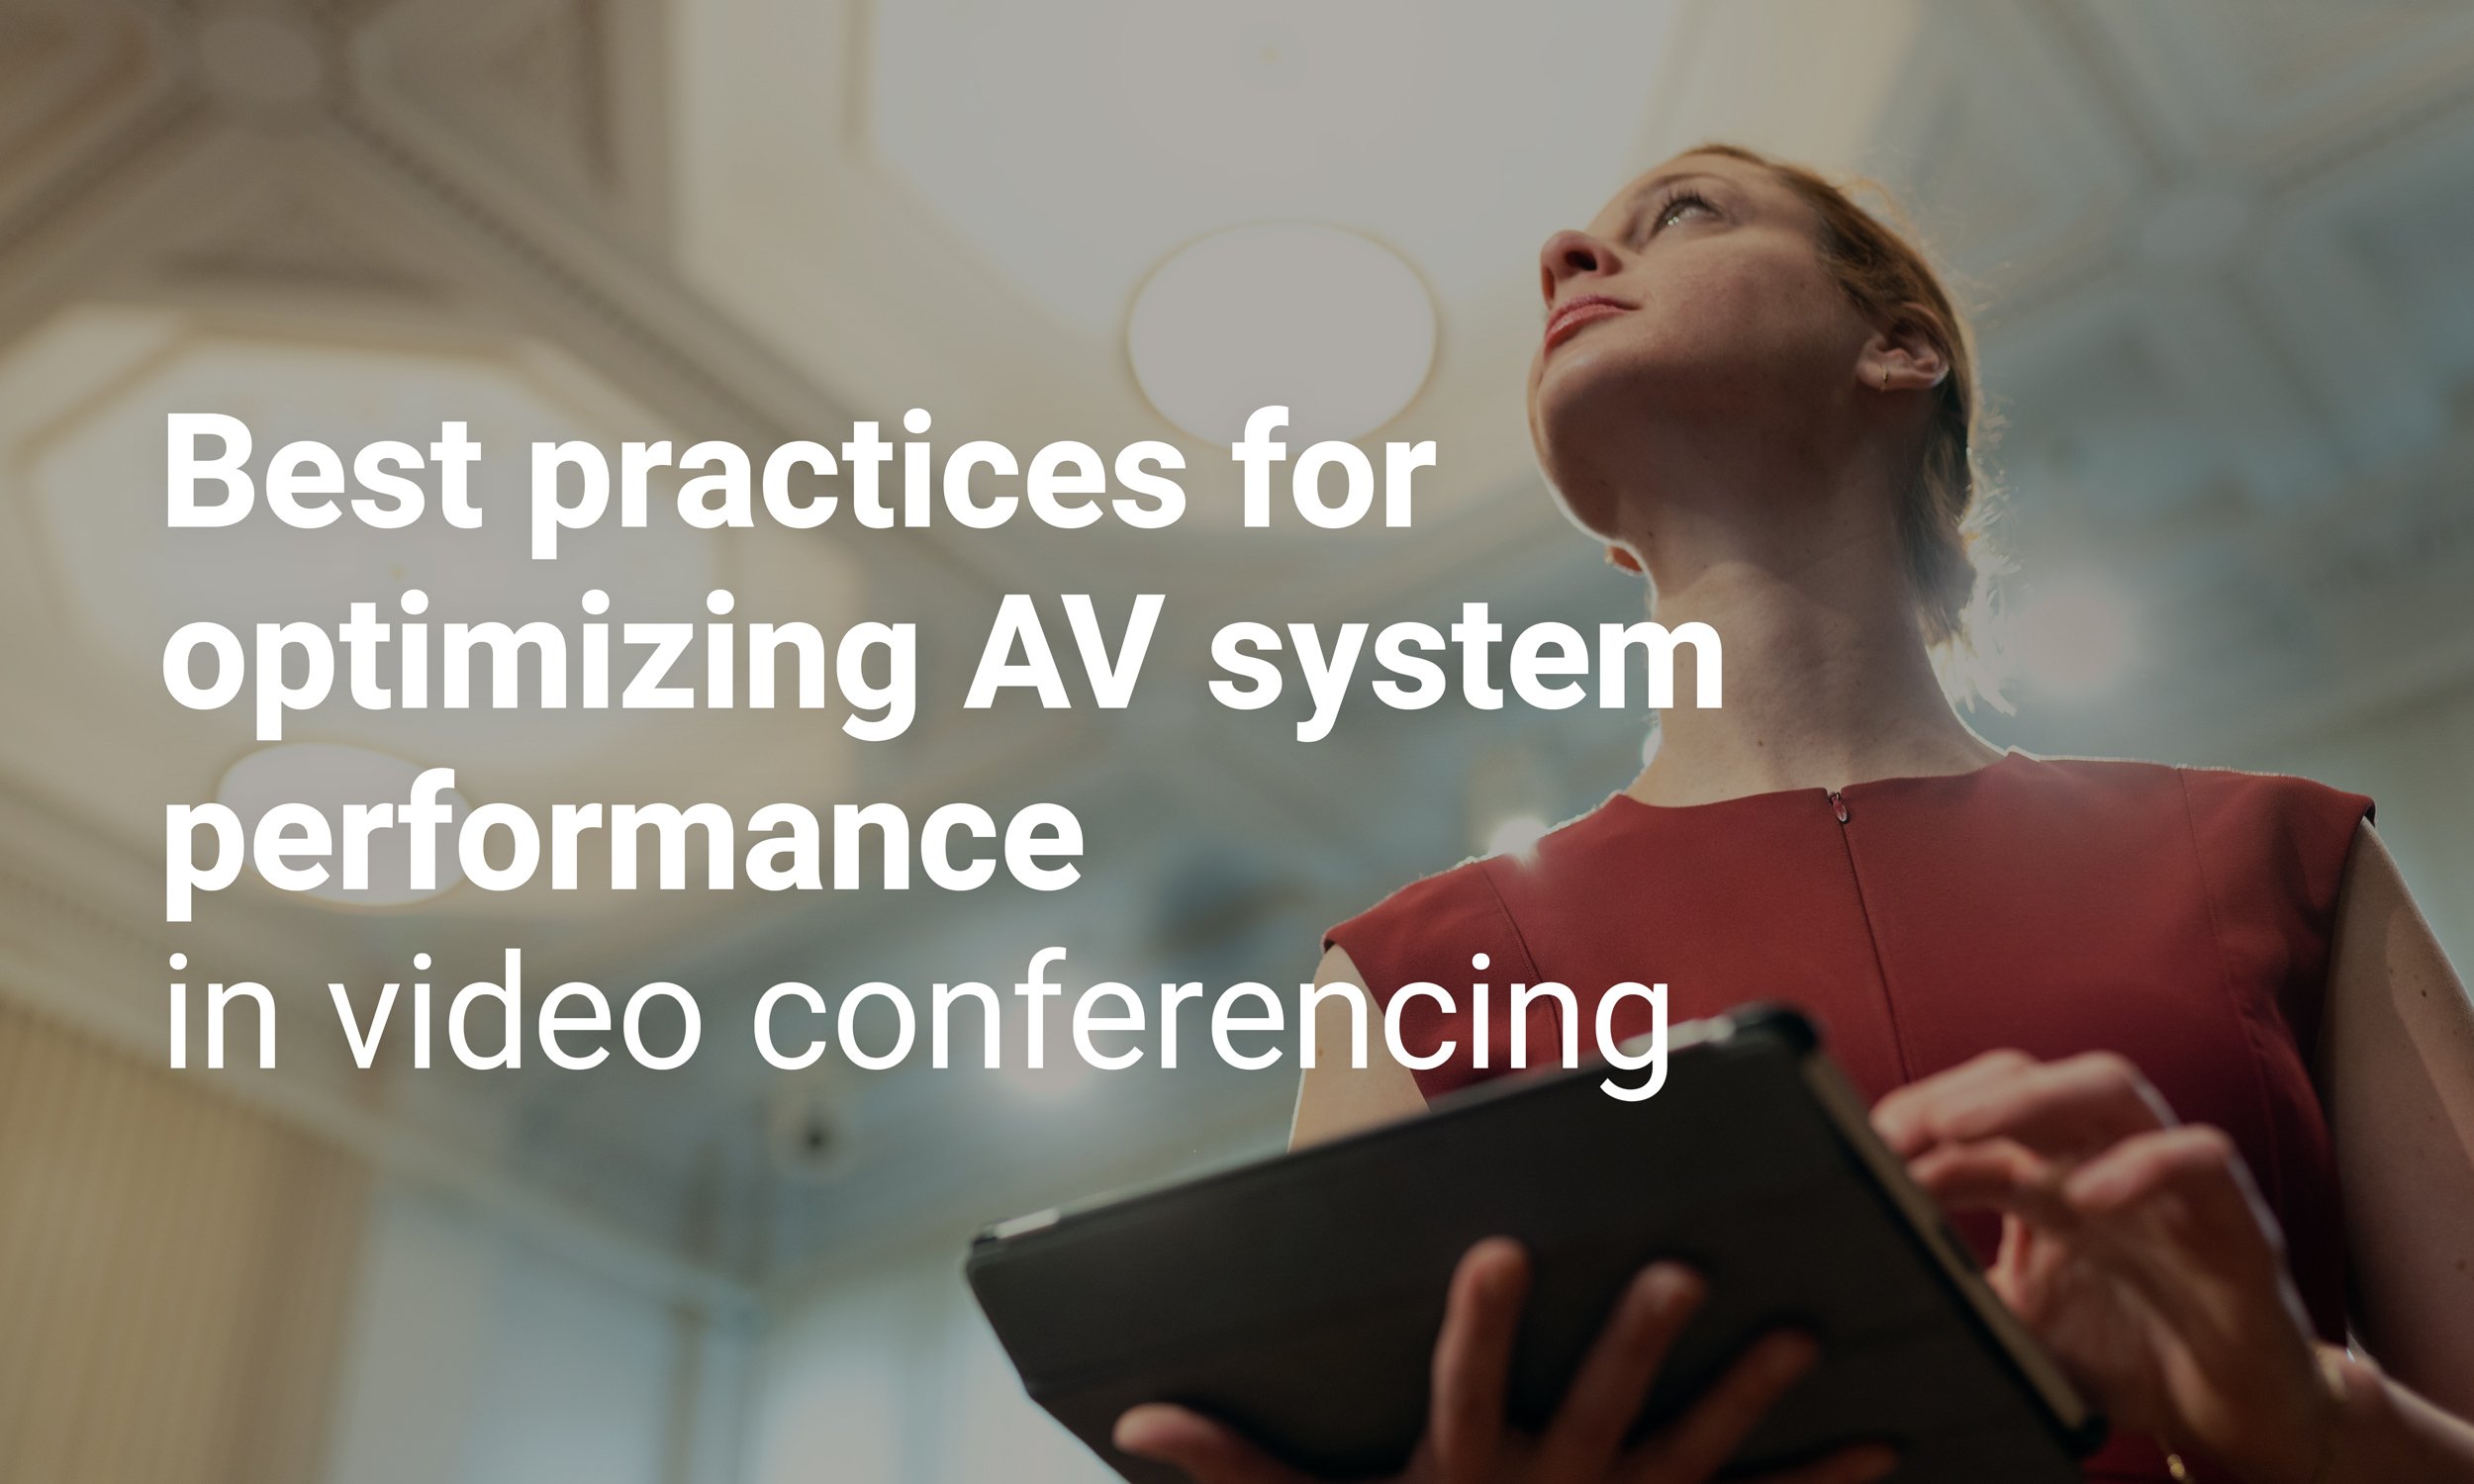 Customer Education: Best Practices for Optimizing AV System Performance in Video Conferencing